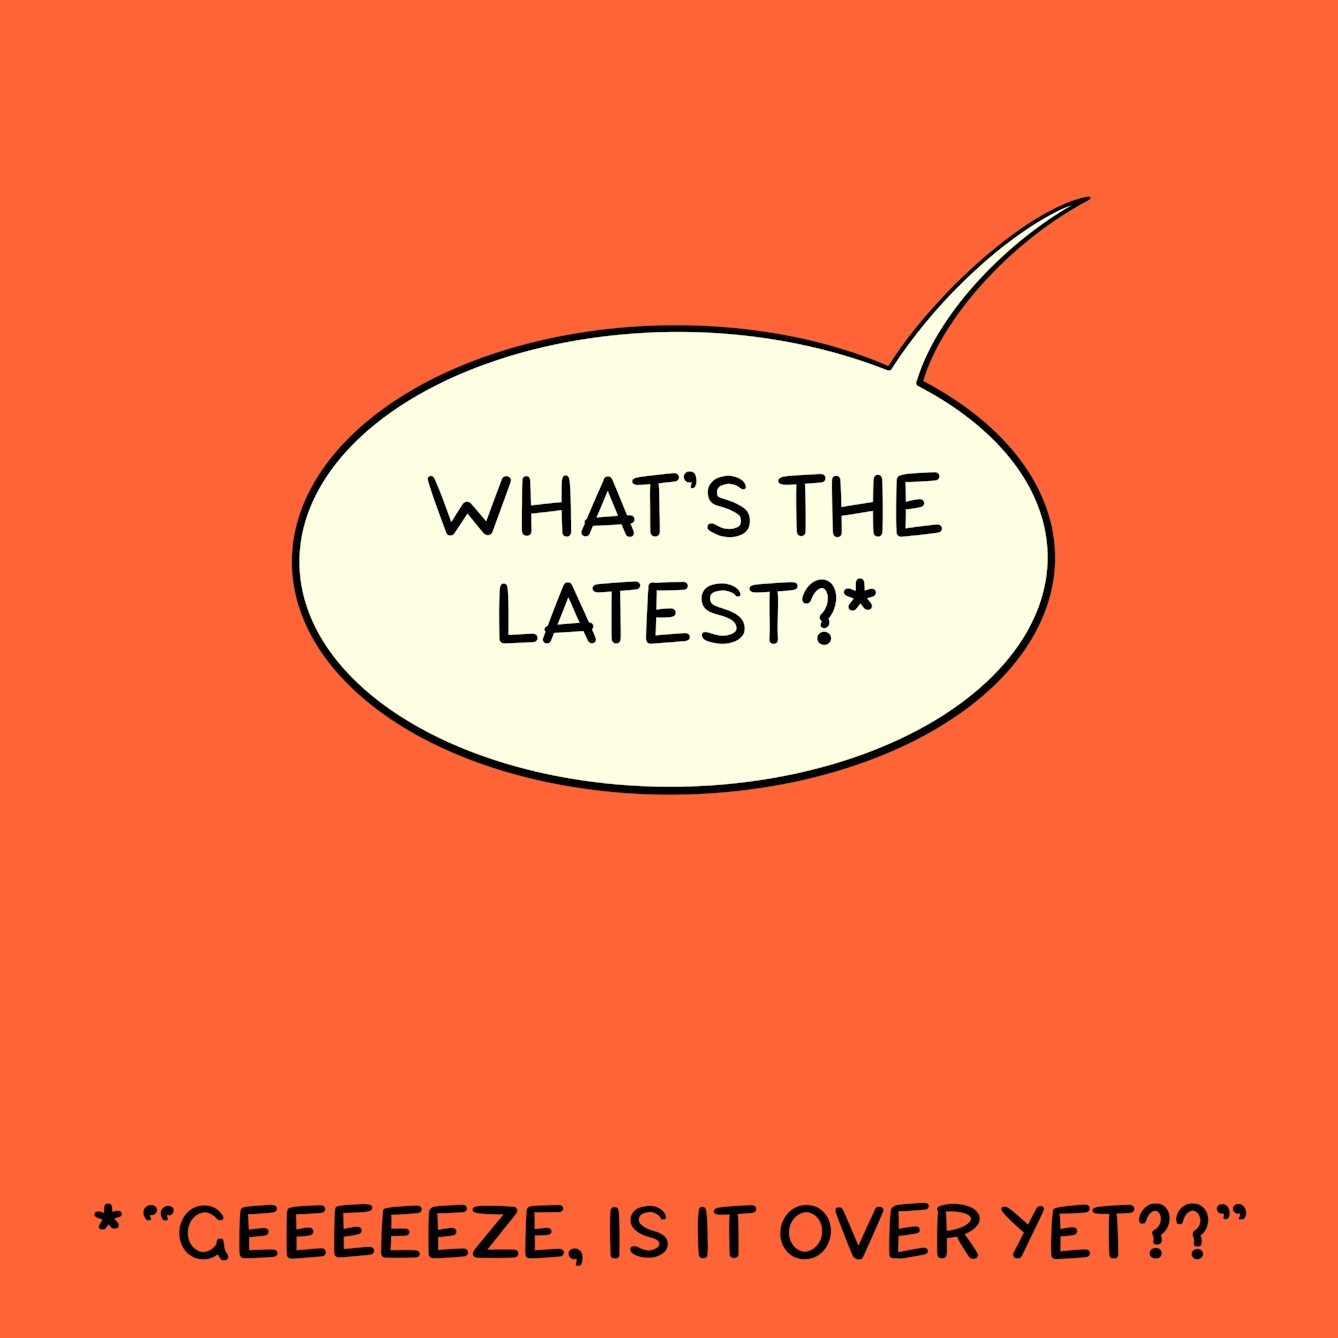 Panel 3 of a six-panel comic drawn digitally: Speech bubble reads "What's the latest?*". The asterisk below says "Geeeeeze, is it over yet??"